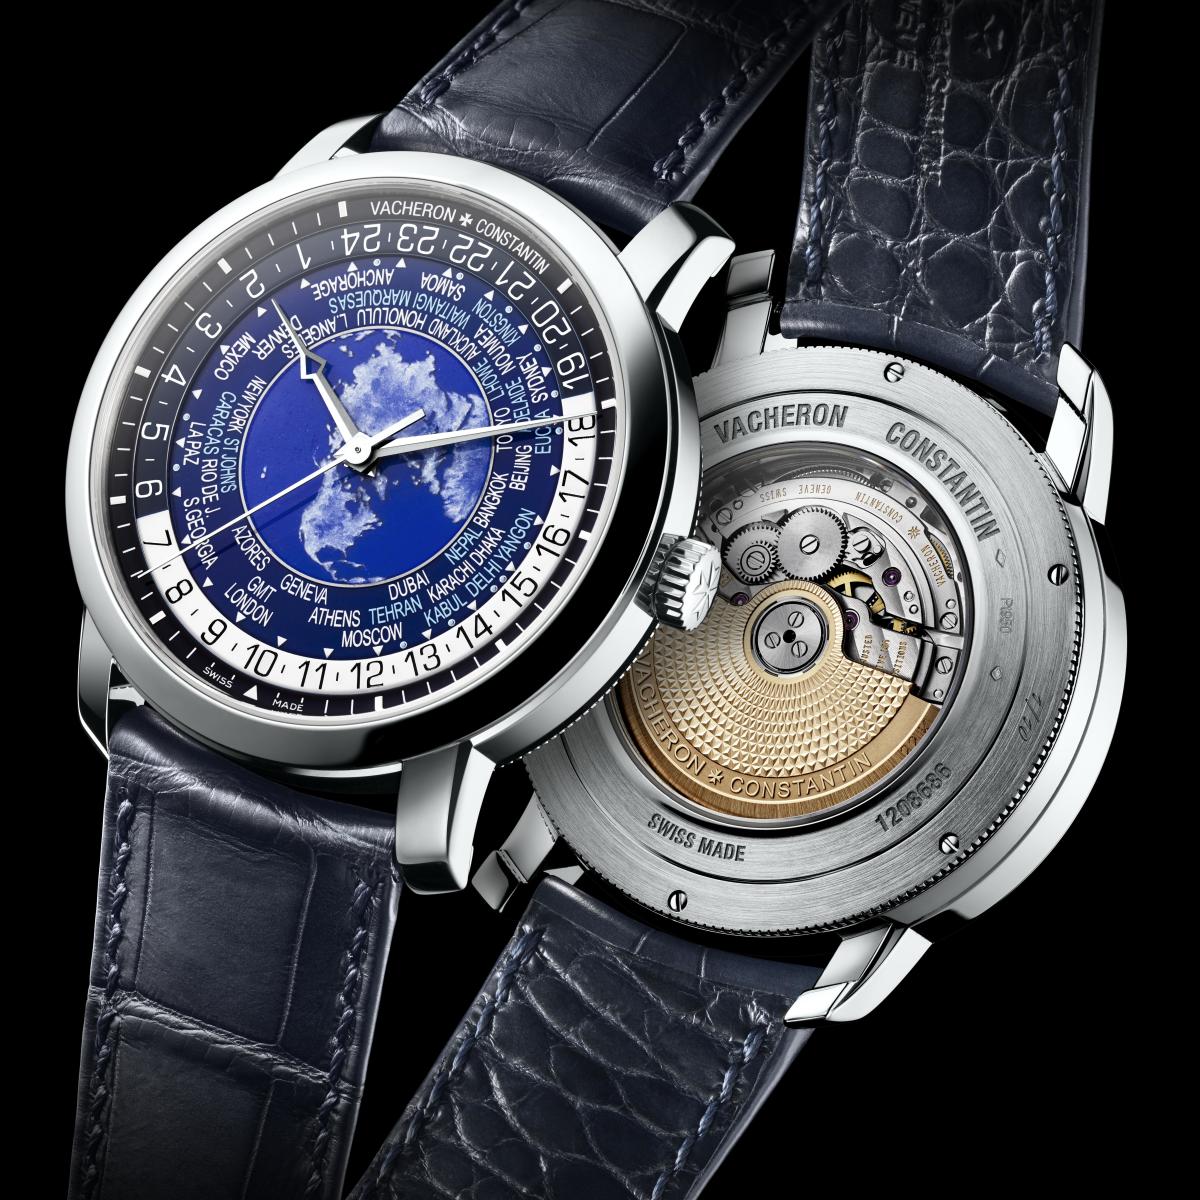 Vacheron Constantin releases a blue version of their Traditionelle ...